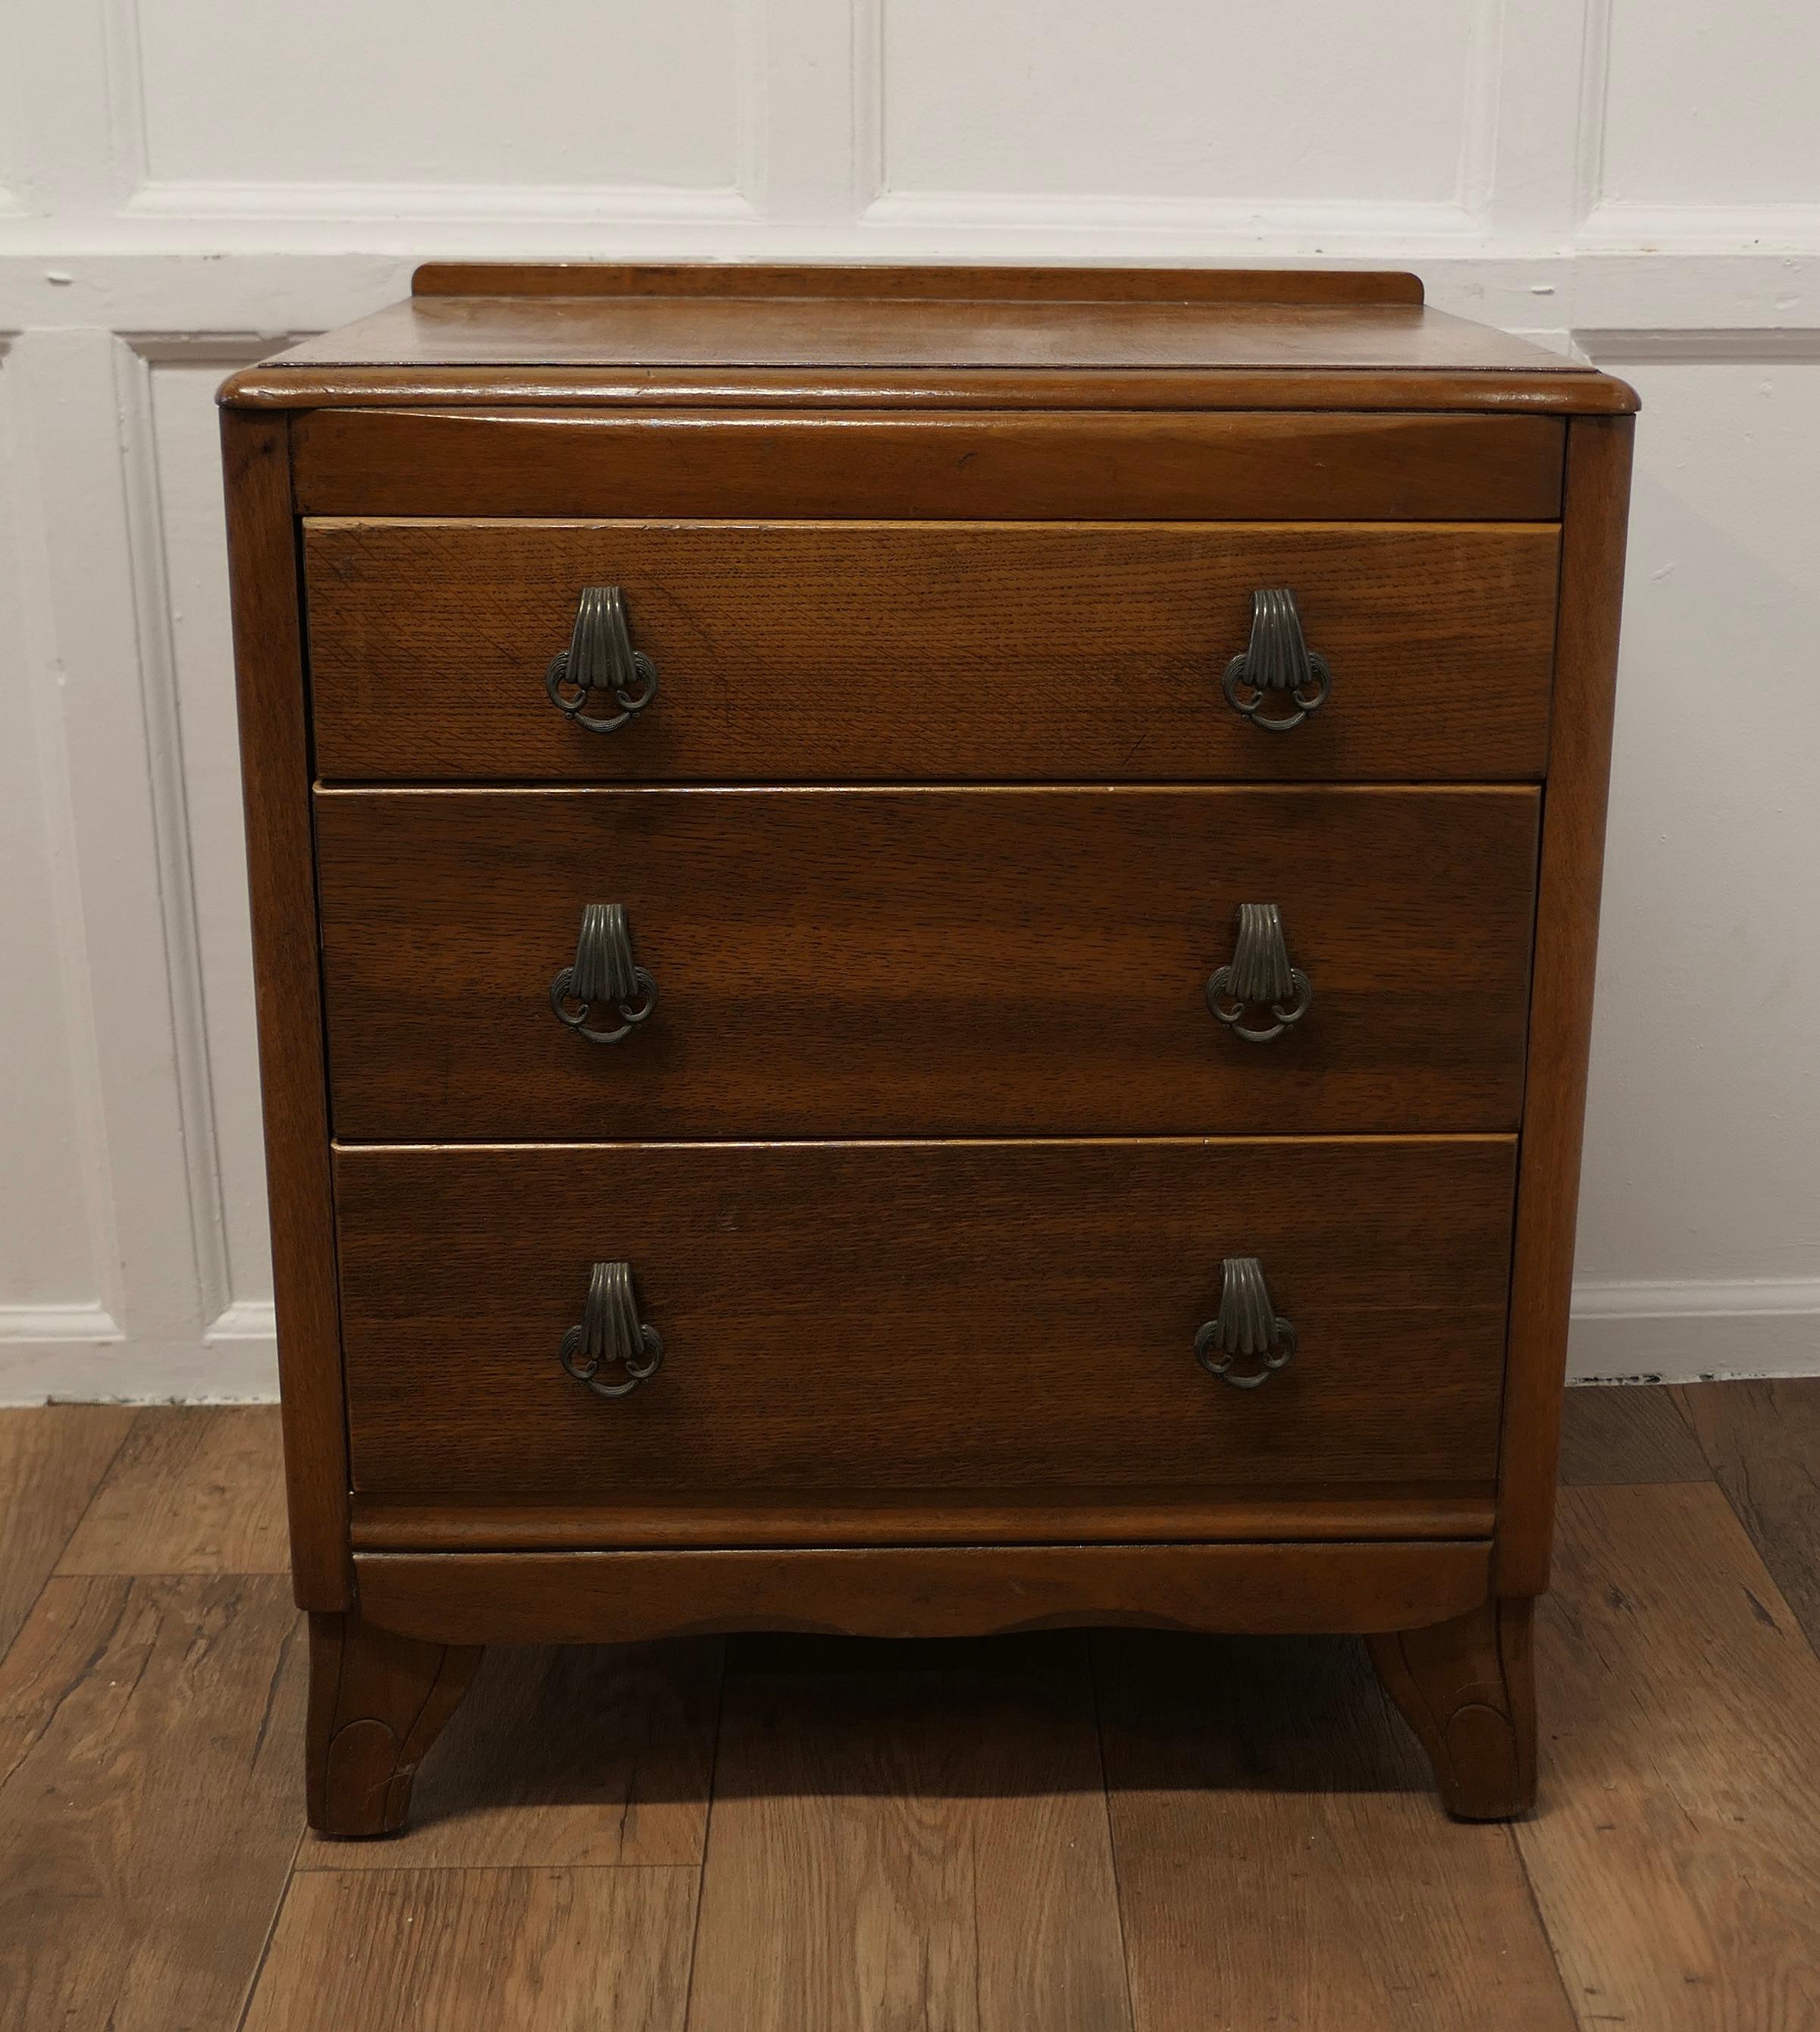 Art Deco Golden Oak Chest of Drawers by Lebus

This is a Classic piece of Oak Furniture from the 1930/40 Art Deco period, the chest has a slight curve to the top with a moulded edge 
The 3 long drawers have sturdy decorative handles and it stands